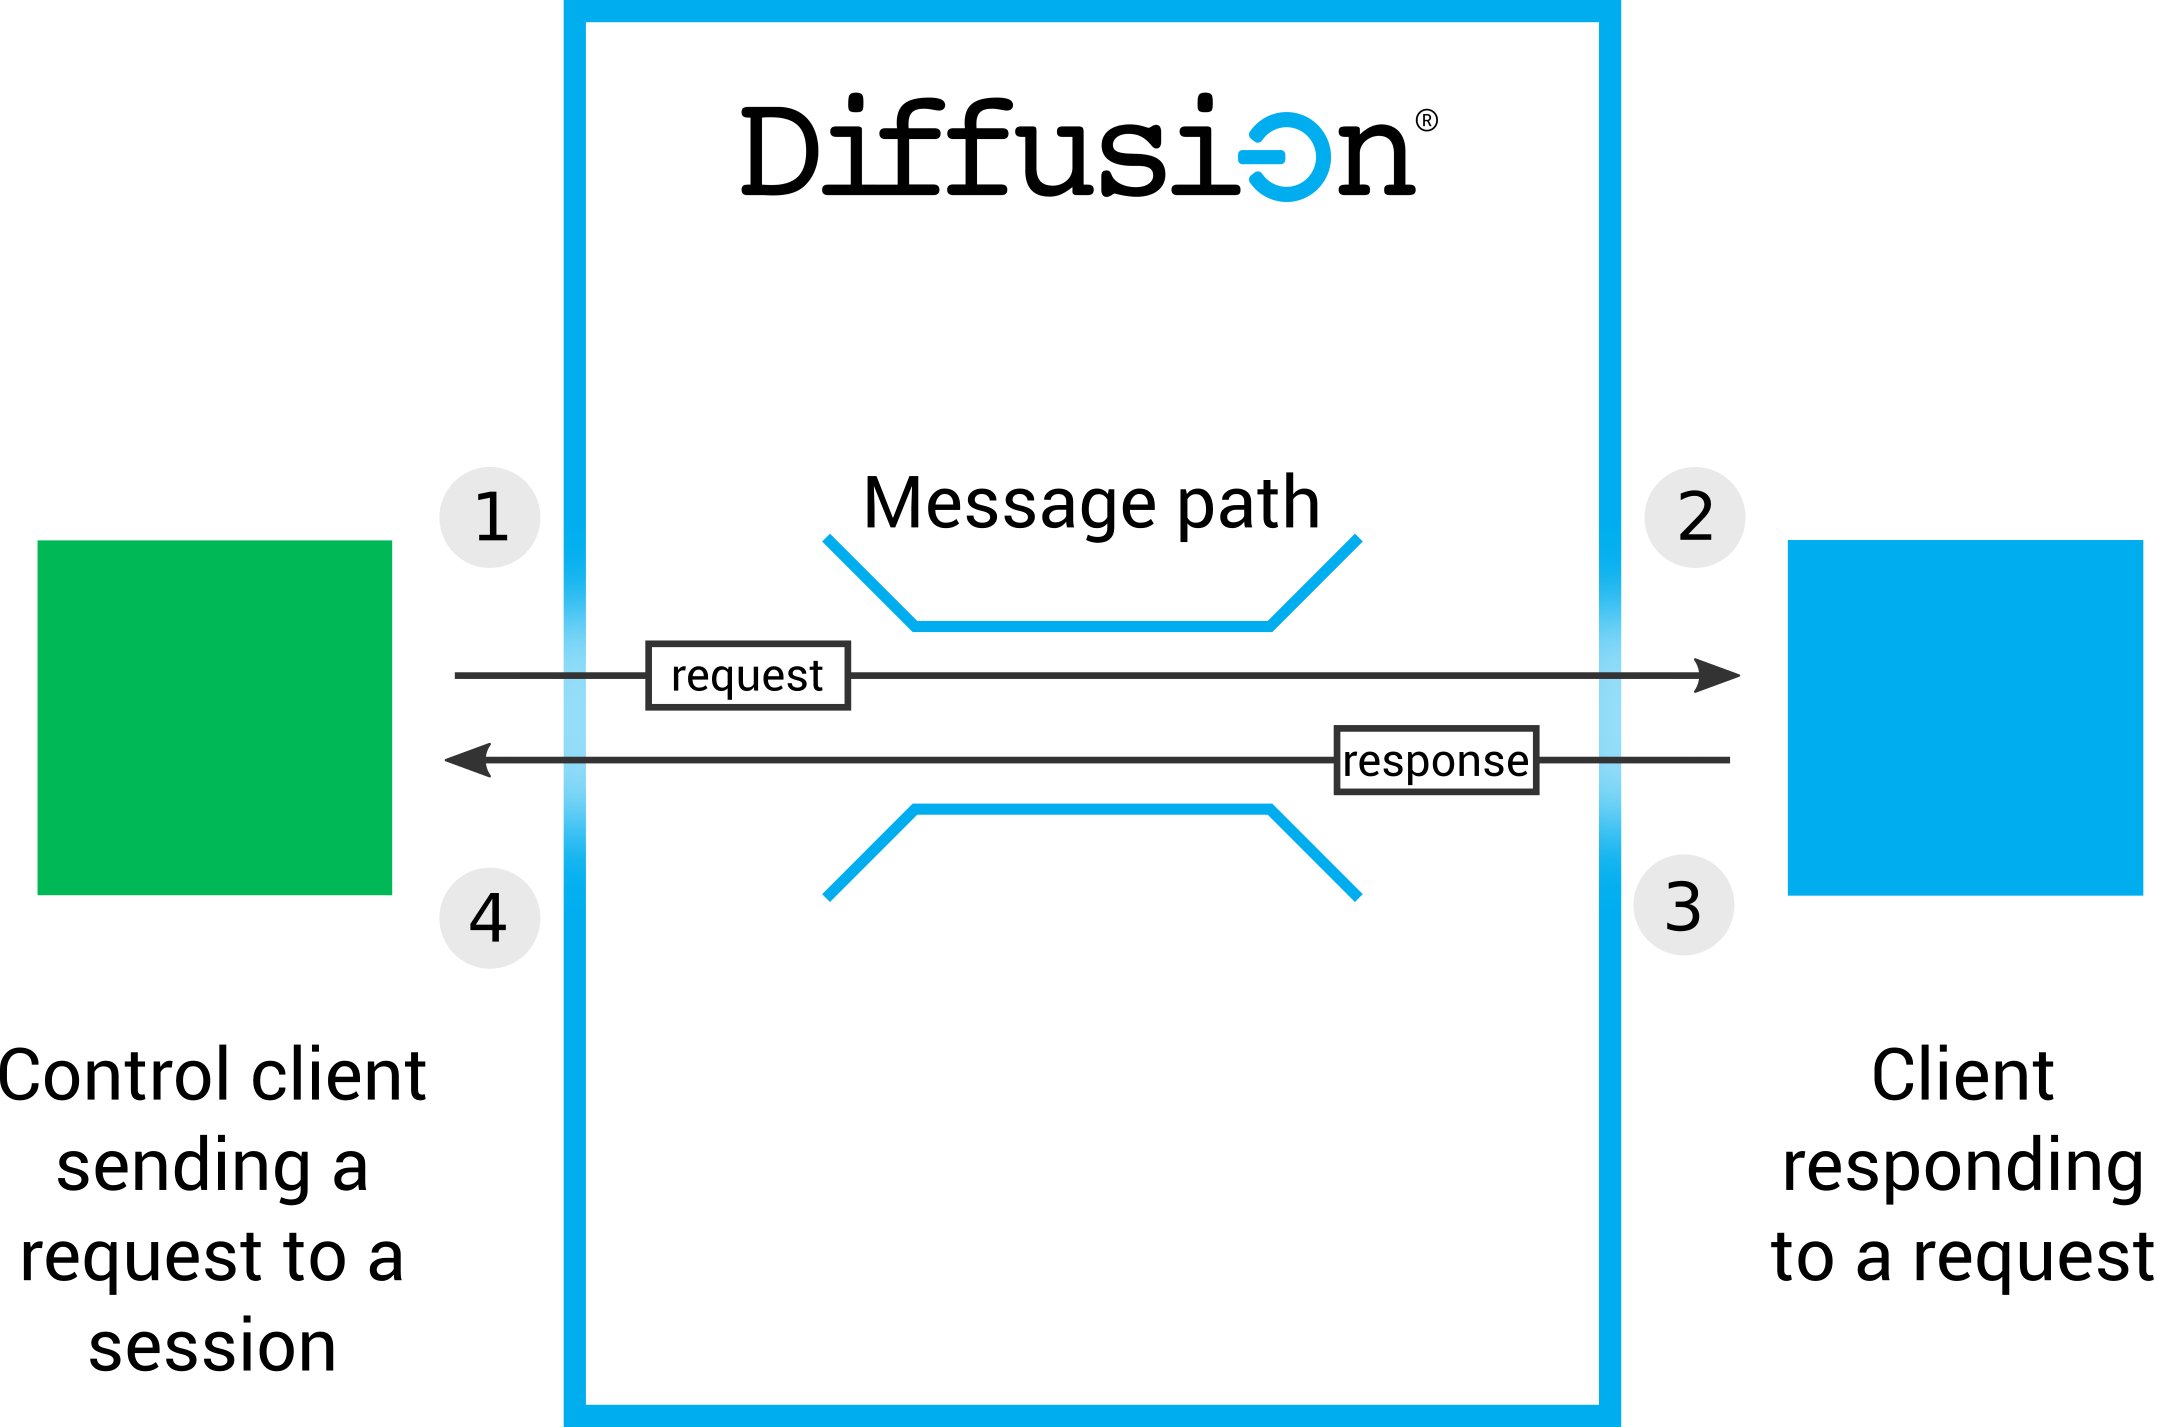 A control client session on the left. Diffusion in the centre. Another client session on the right. An arrow representing the request message goes from the control client session through a shape representing the message path inside the Diffusion server and continues to the other client session. An arrow representing the response message goes from the receiving client session back through the message path on the Diffusion server to the control client session.